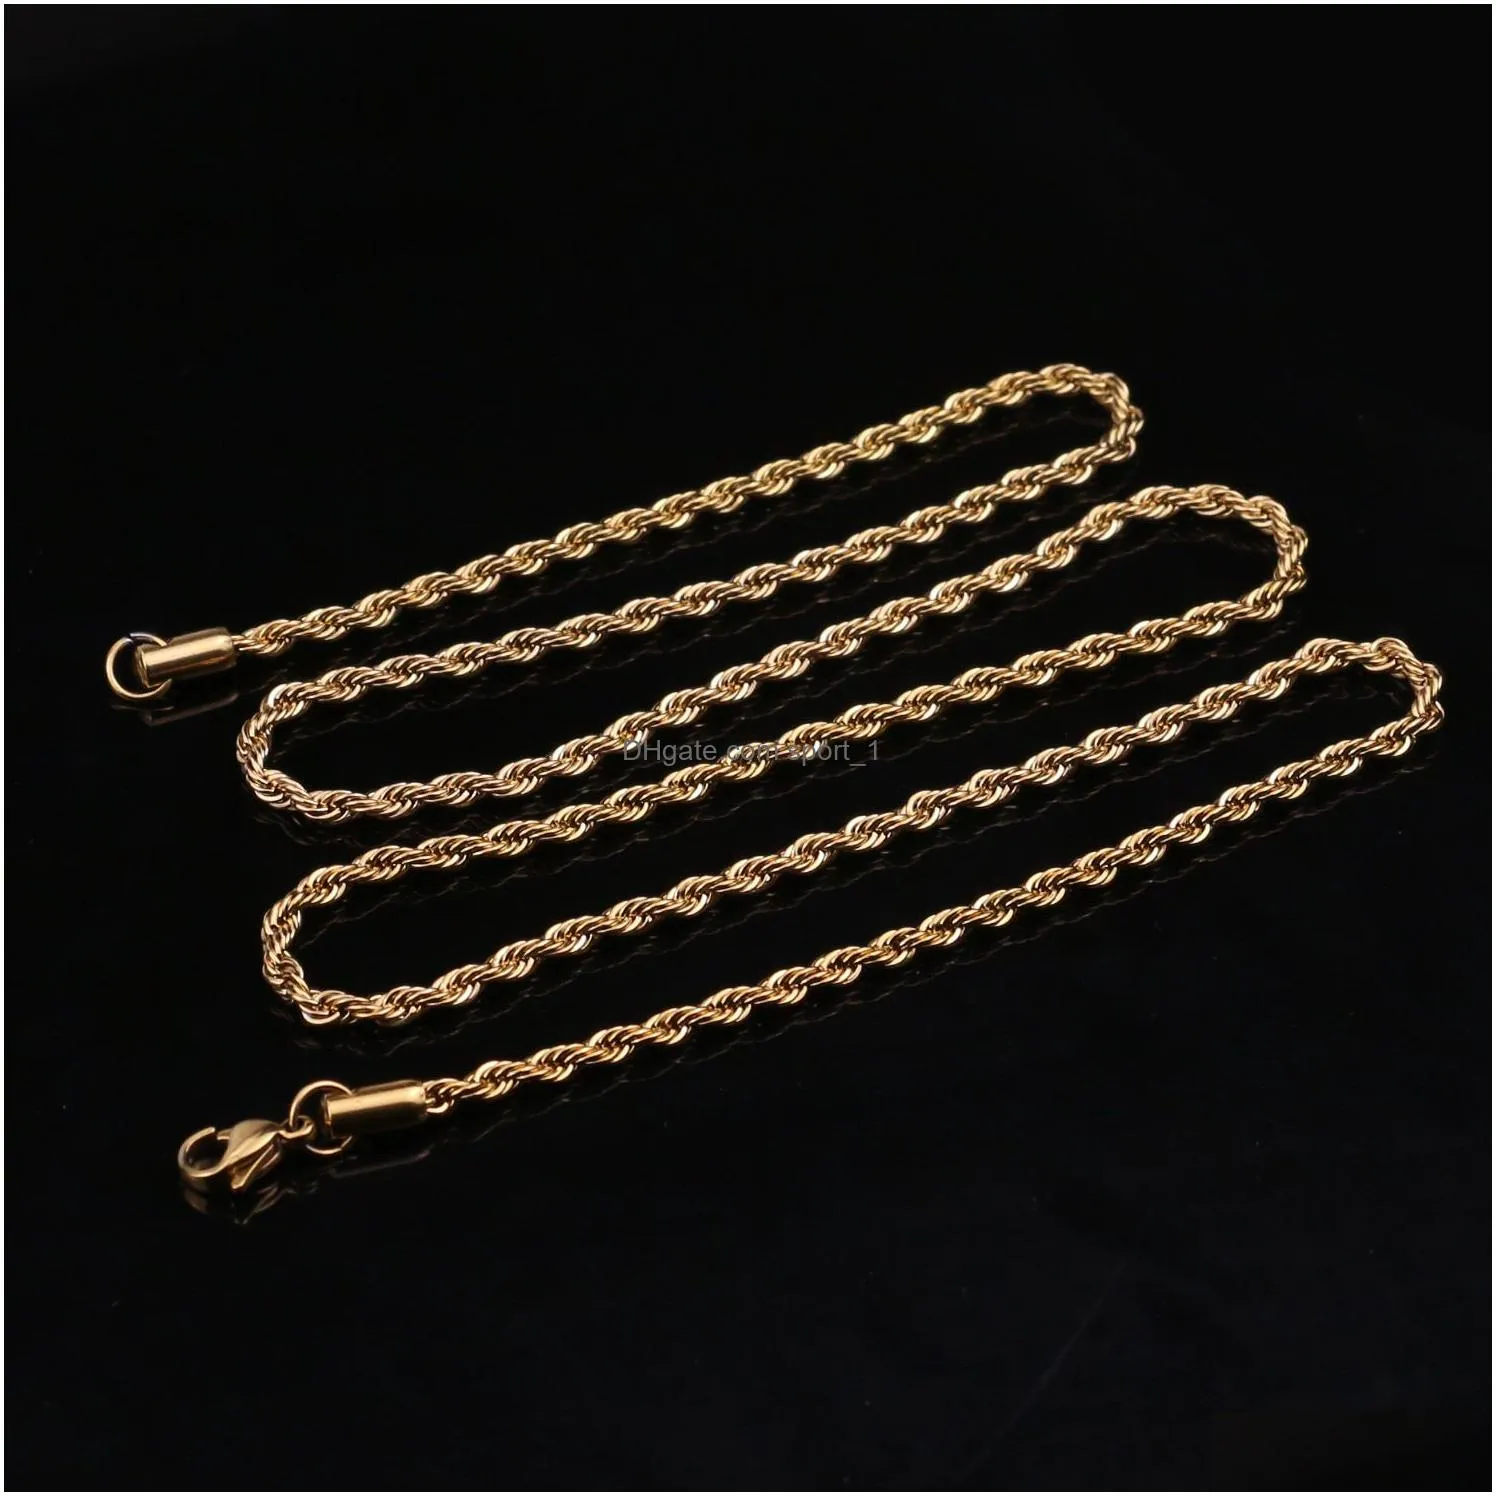 5-7mm stainless steel twisted rope gold chain necklaces for men women hip hop titanium steel thick choker fashion party jewelry gift